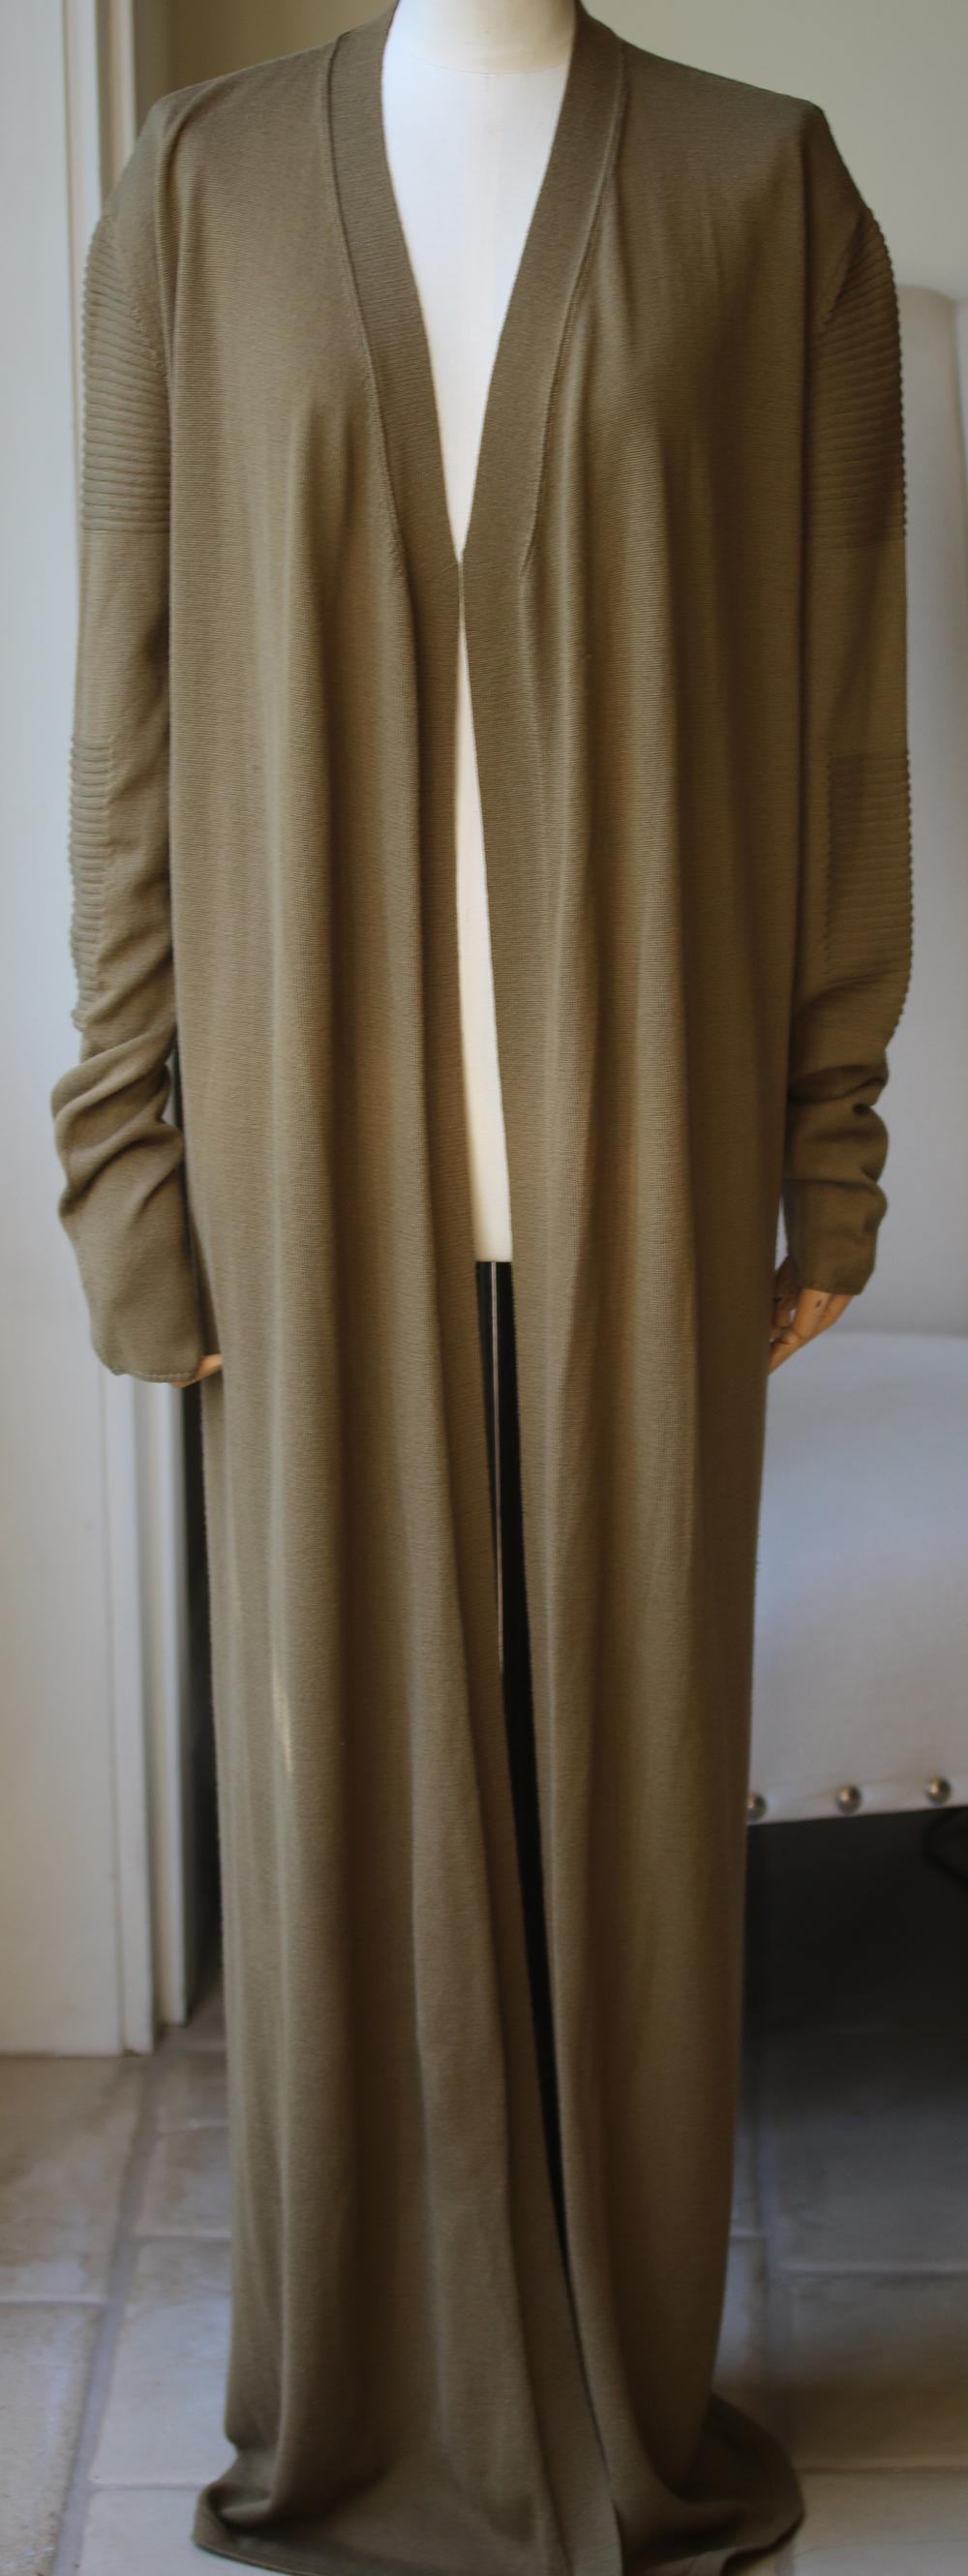 If you don't yet own a maxi cardigan, Rick Owens' army-green style is sure to be all the persuading you need. It's finely knitted from pure merino wool that drapes beautifully and is really soft. Ribbed panels on the sleeves ensures it fits